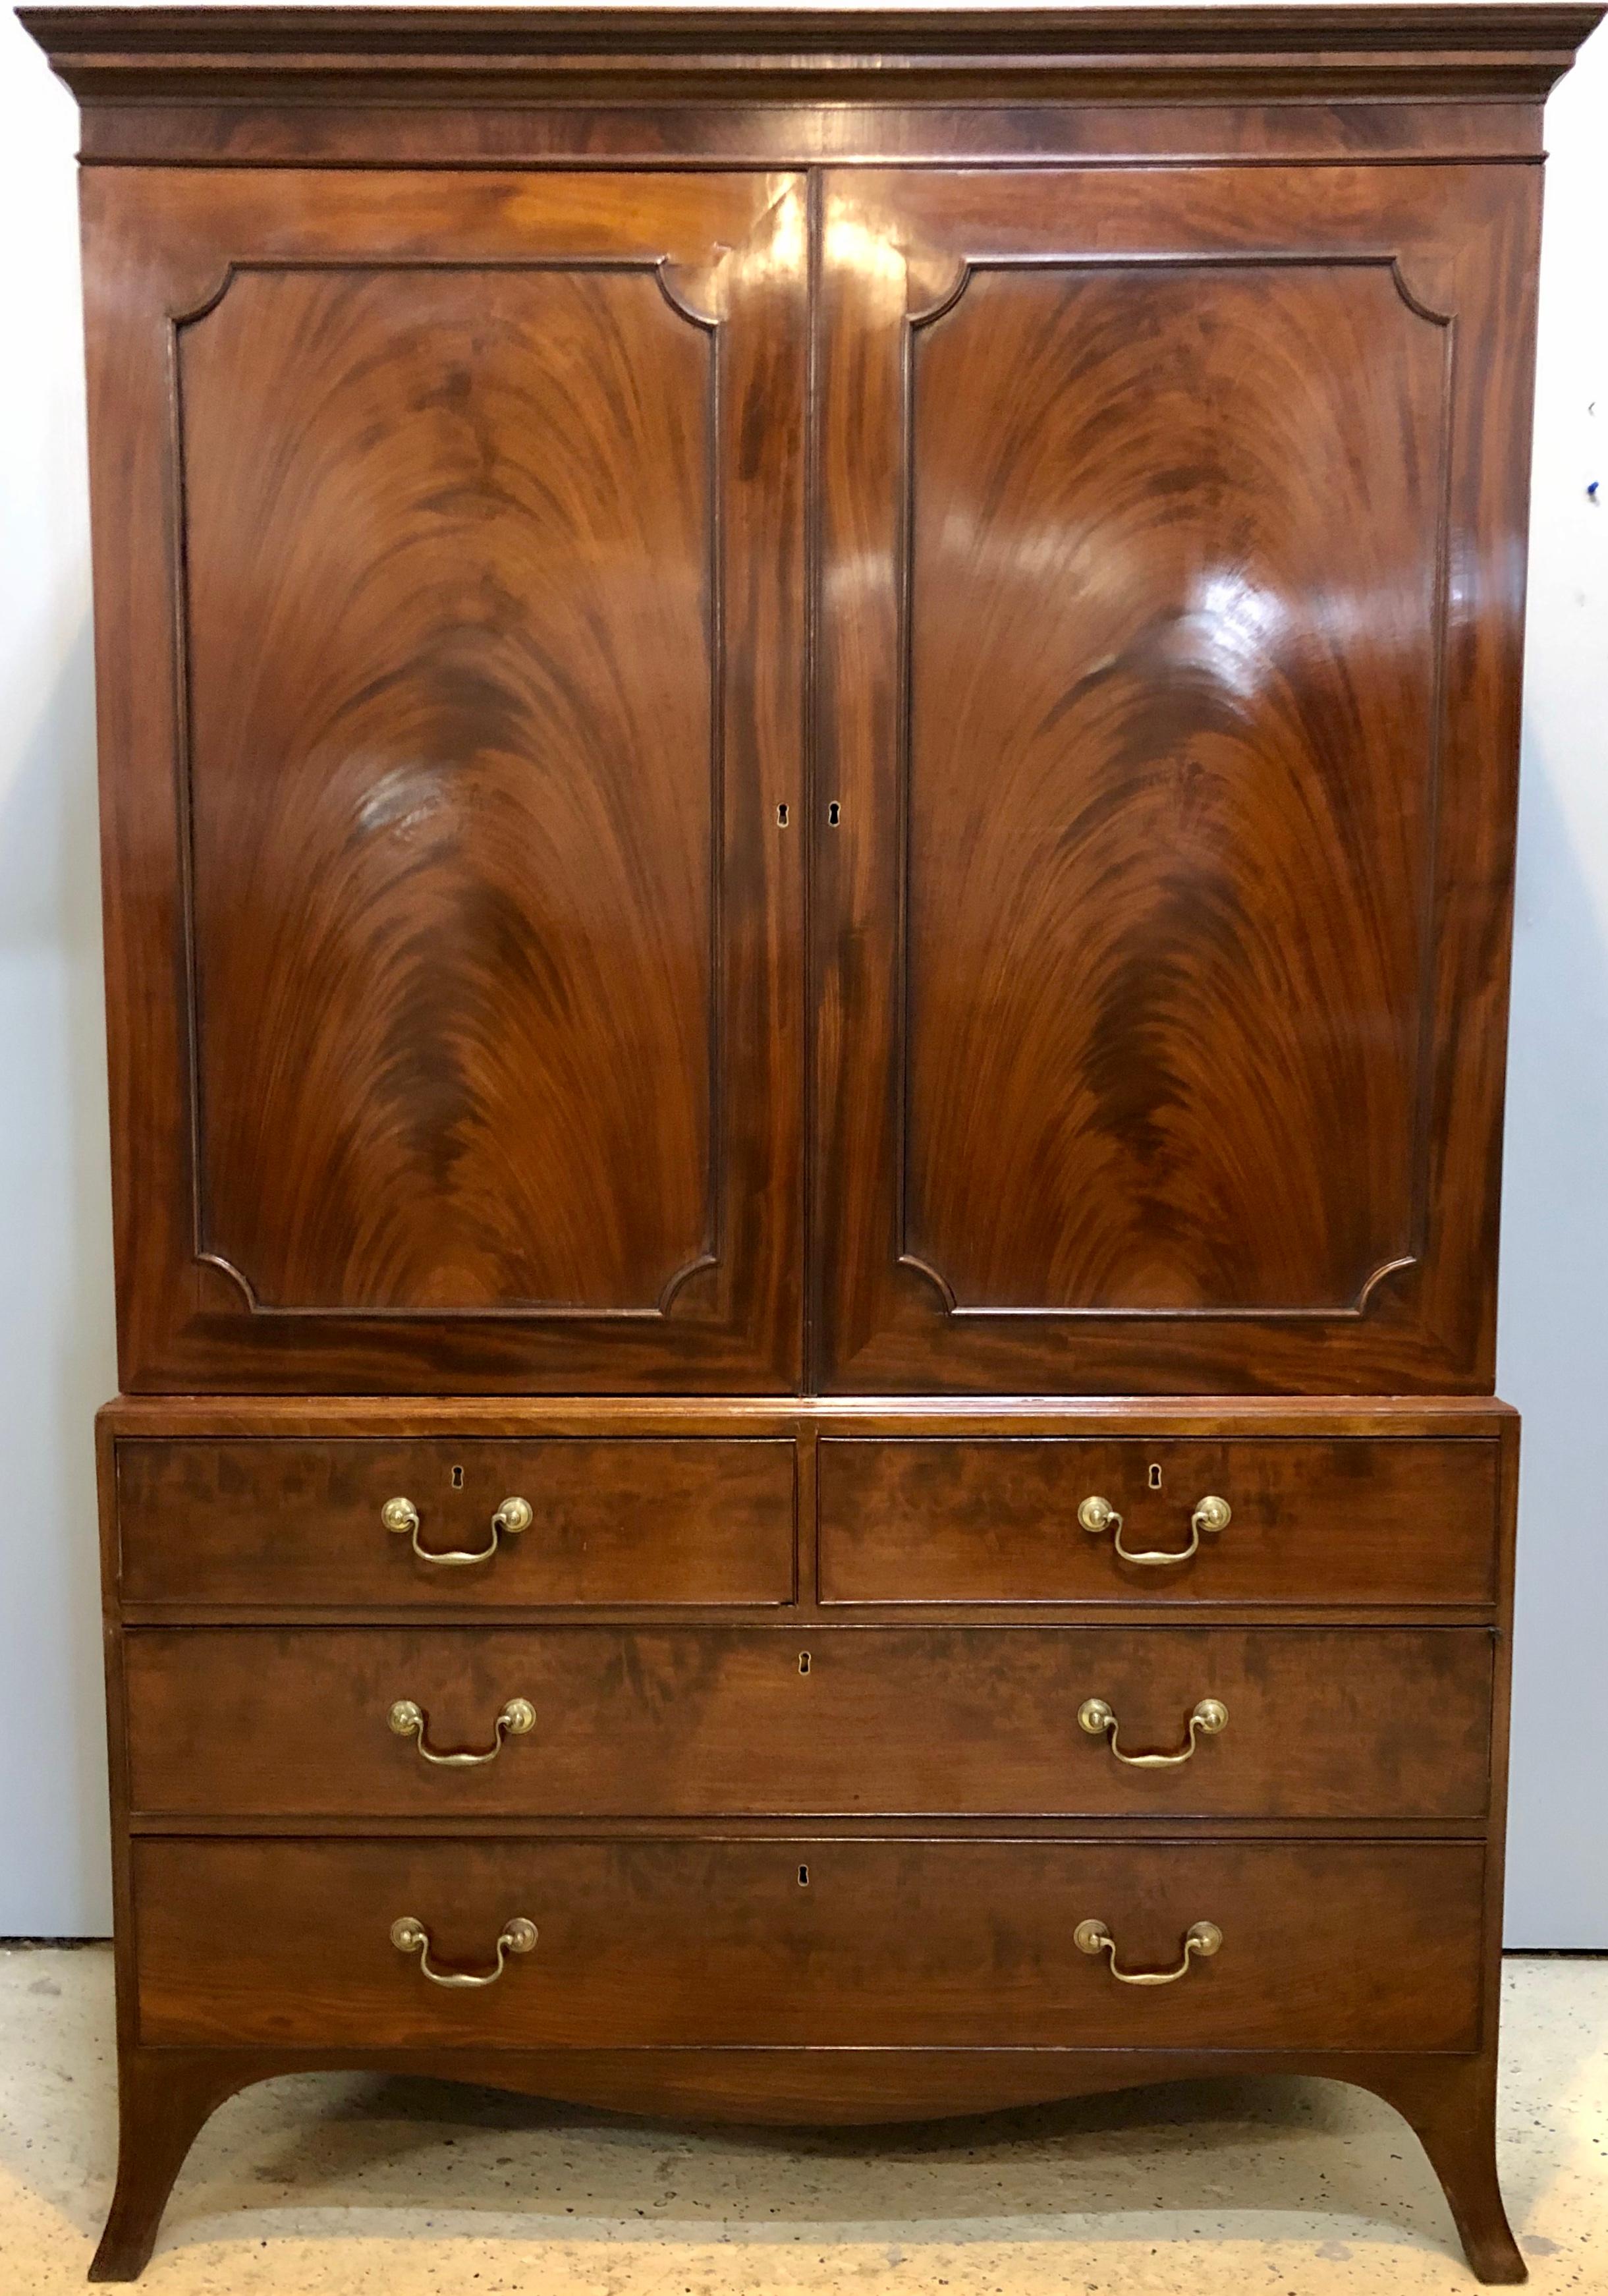 18th century George III linen press in mahogany. Having two over three drawers on the bottom commode on its original legs with an upper case of two doors leading to an open compartment. This item is priced to be sold immediately. No interior